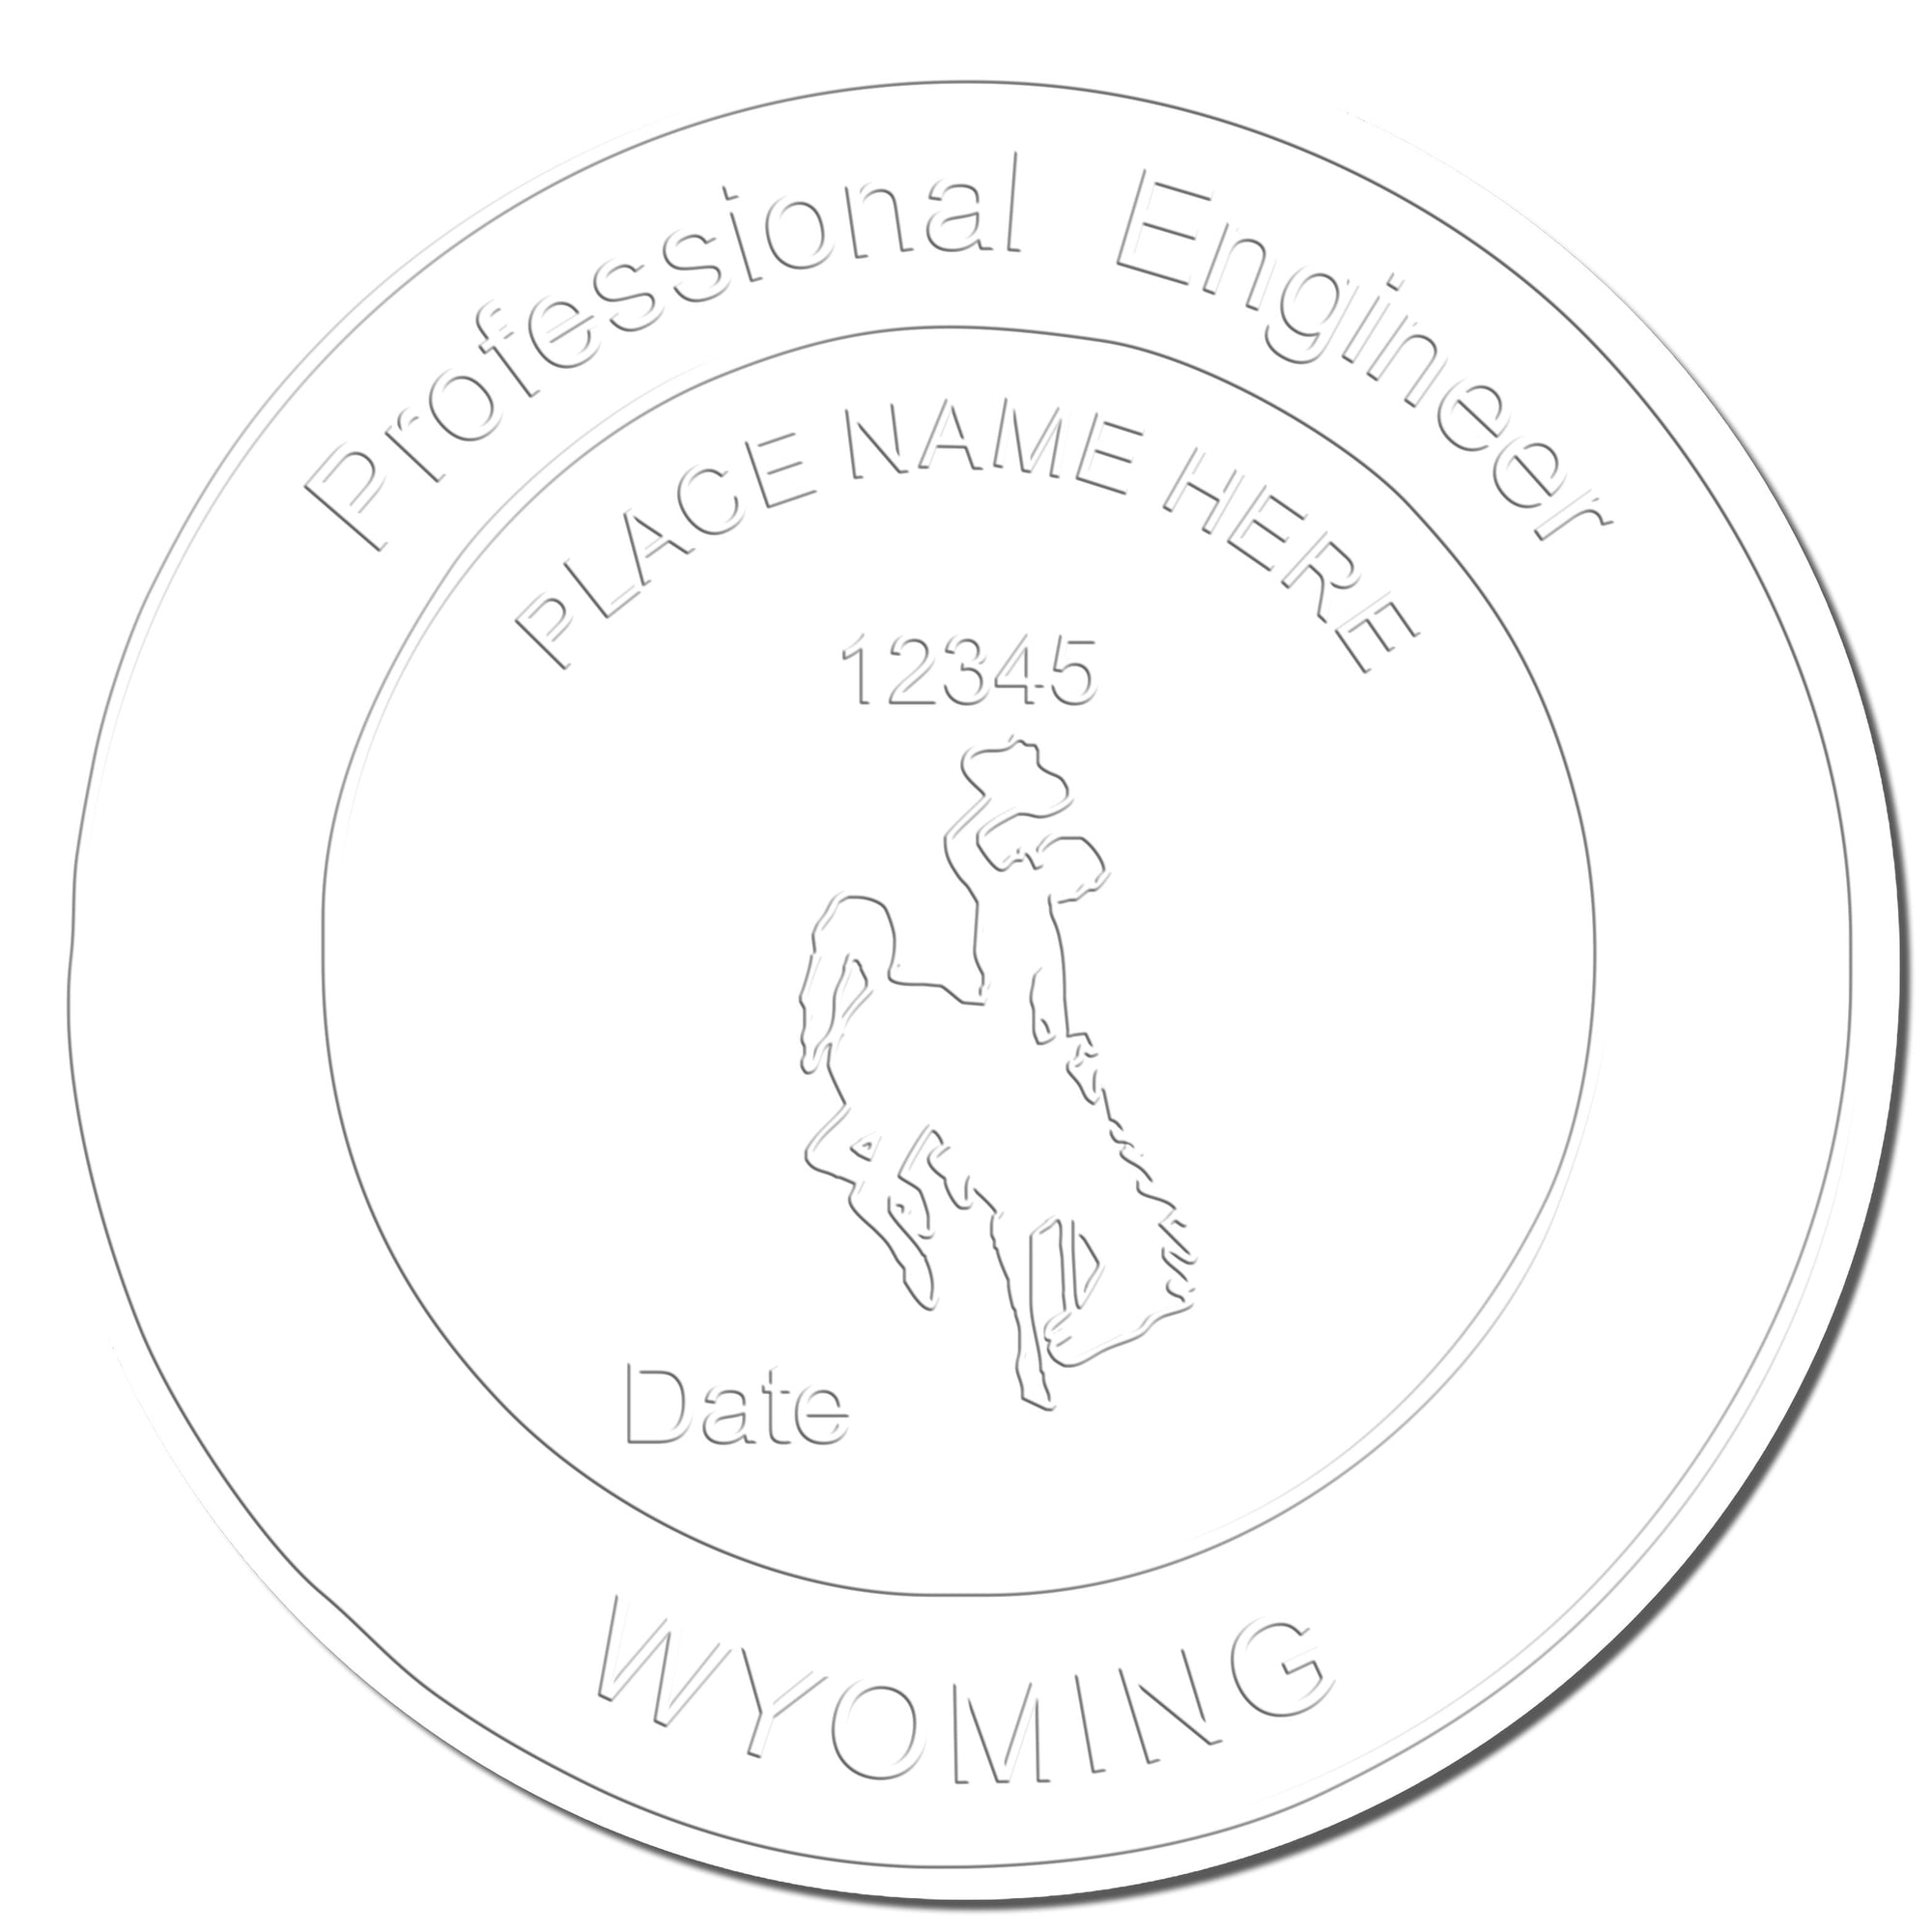 The main image for the Wyoming Engineer Desk Seal depicting a sample of the imprint and electronic files